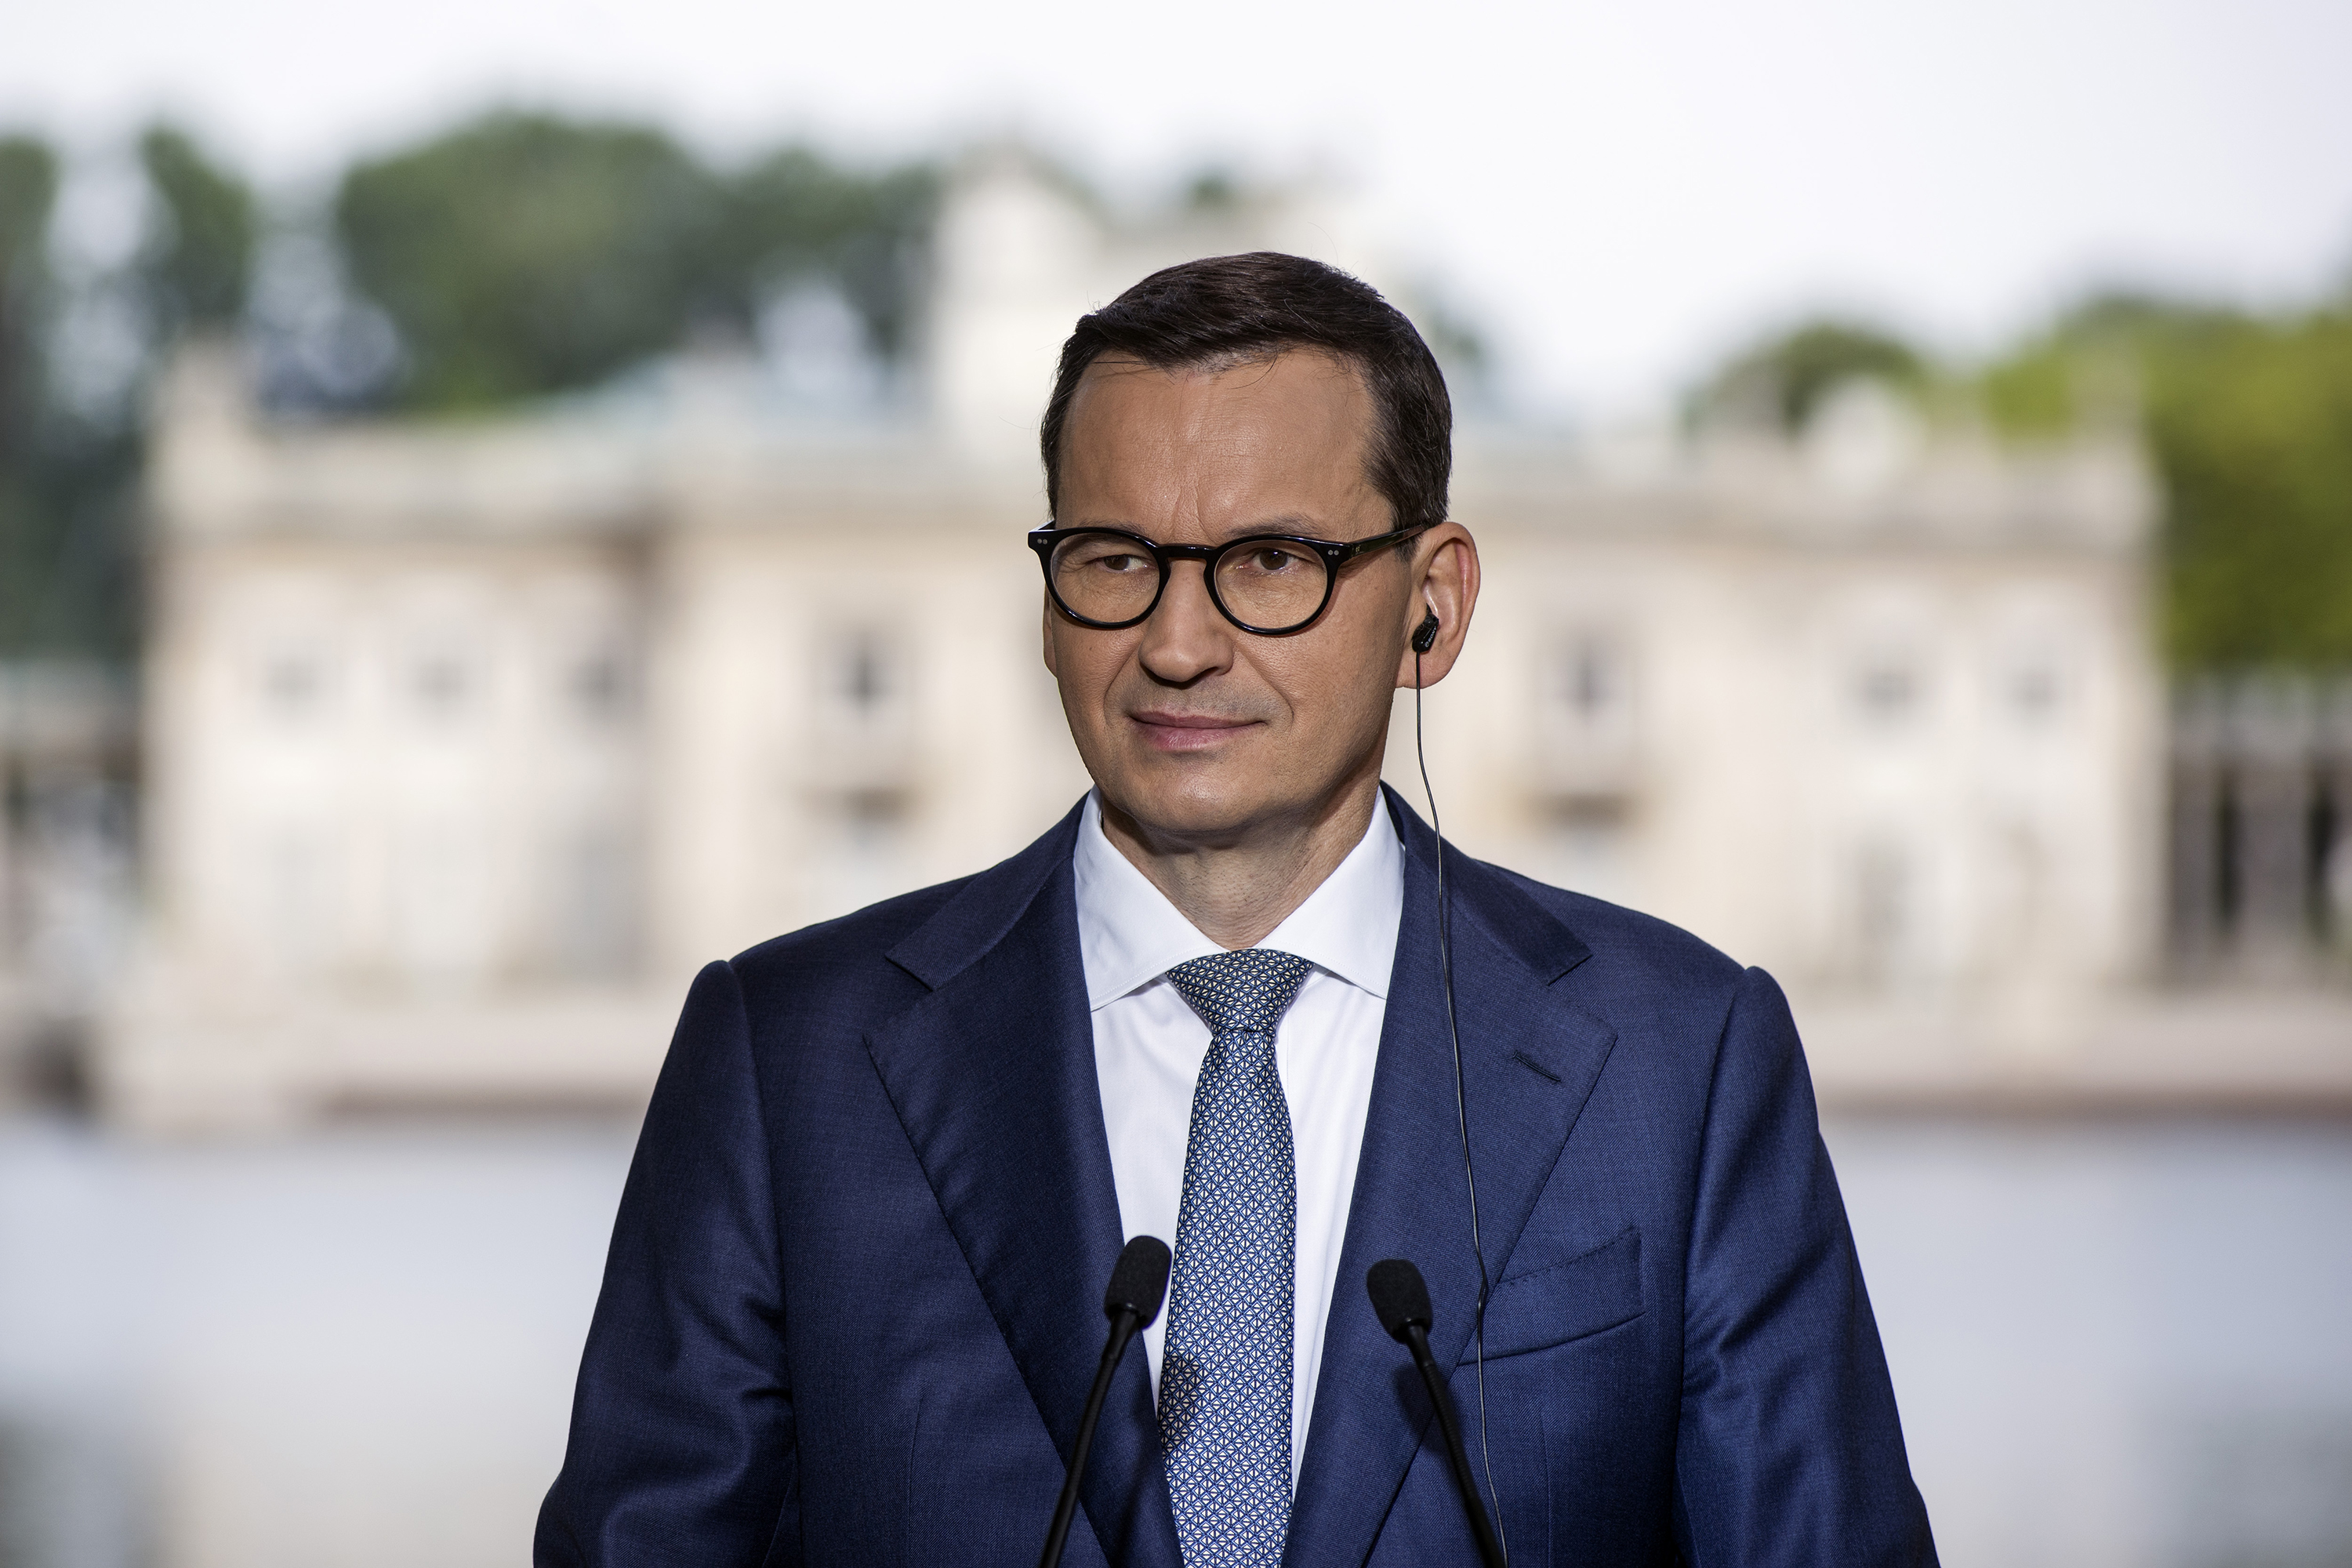 Polish Prime Minister Mateusz Morawiecki during a press conference in Warsaw, Poland.